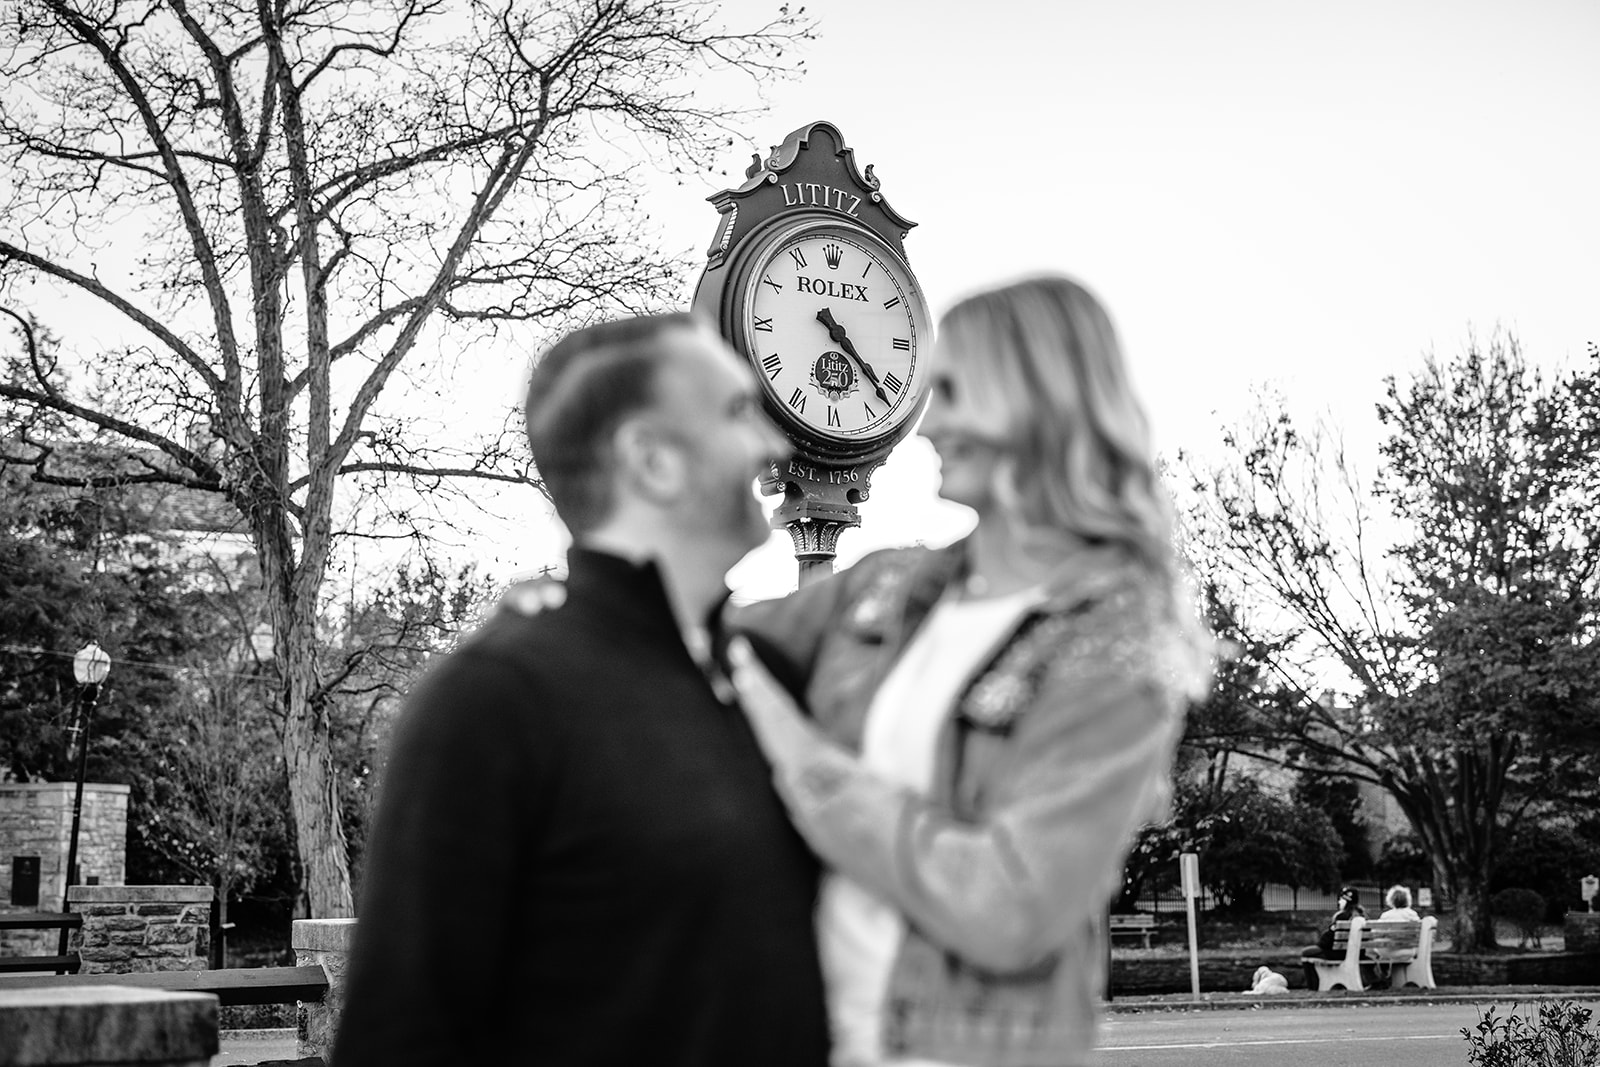 outdoor fall engagement session at Lititz Springs Park in central Pennsylvania Wilbur Buds railroad tracks